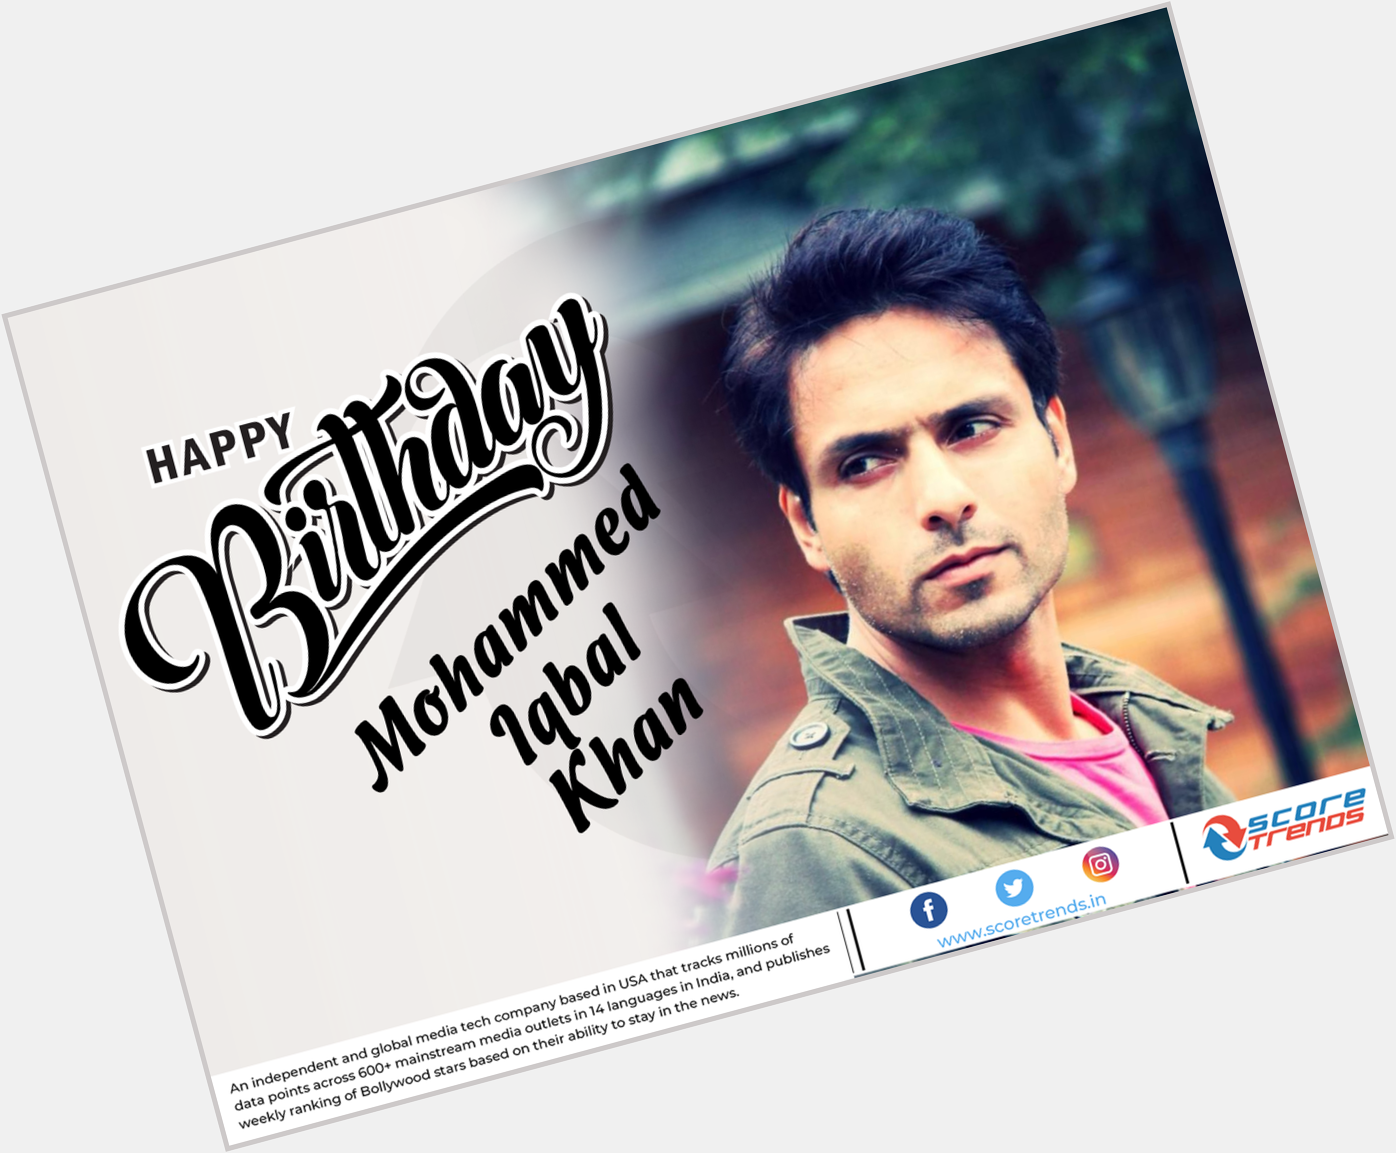 Score Trends wishes Mohammed Iqbal Khan a Happy Birthday!! 